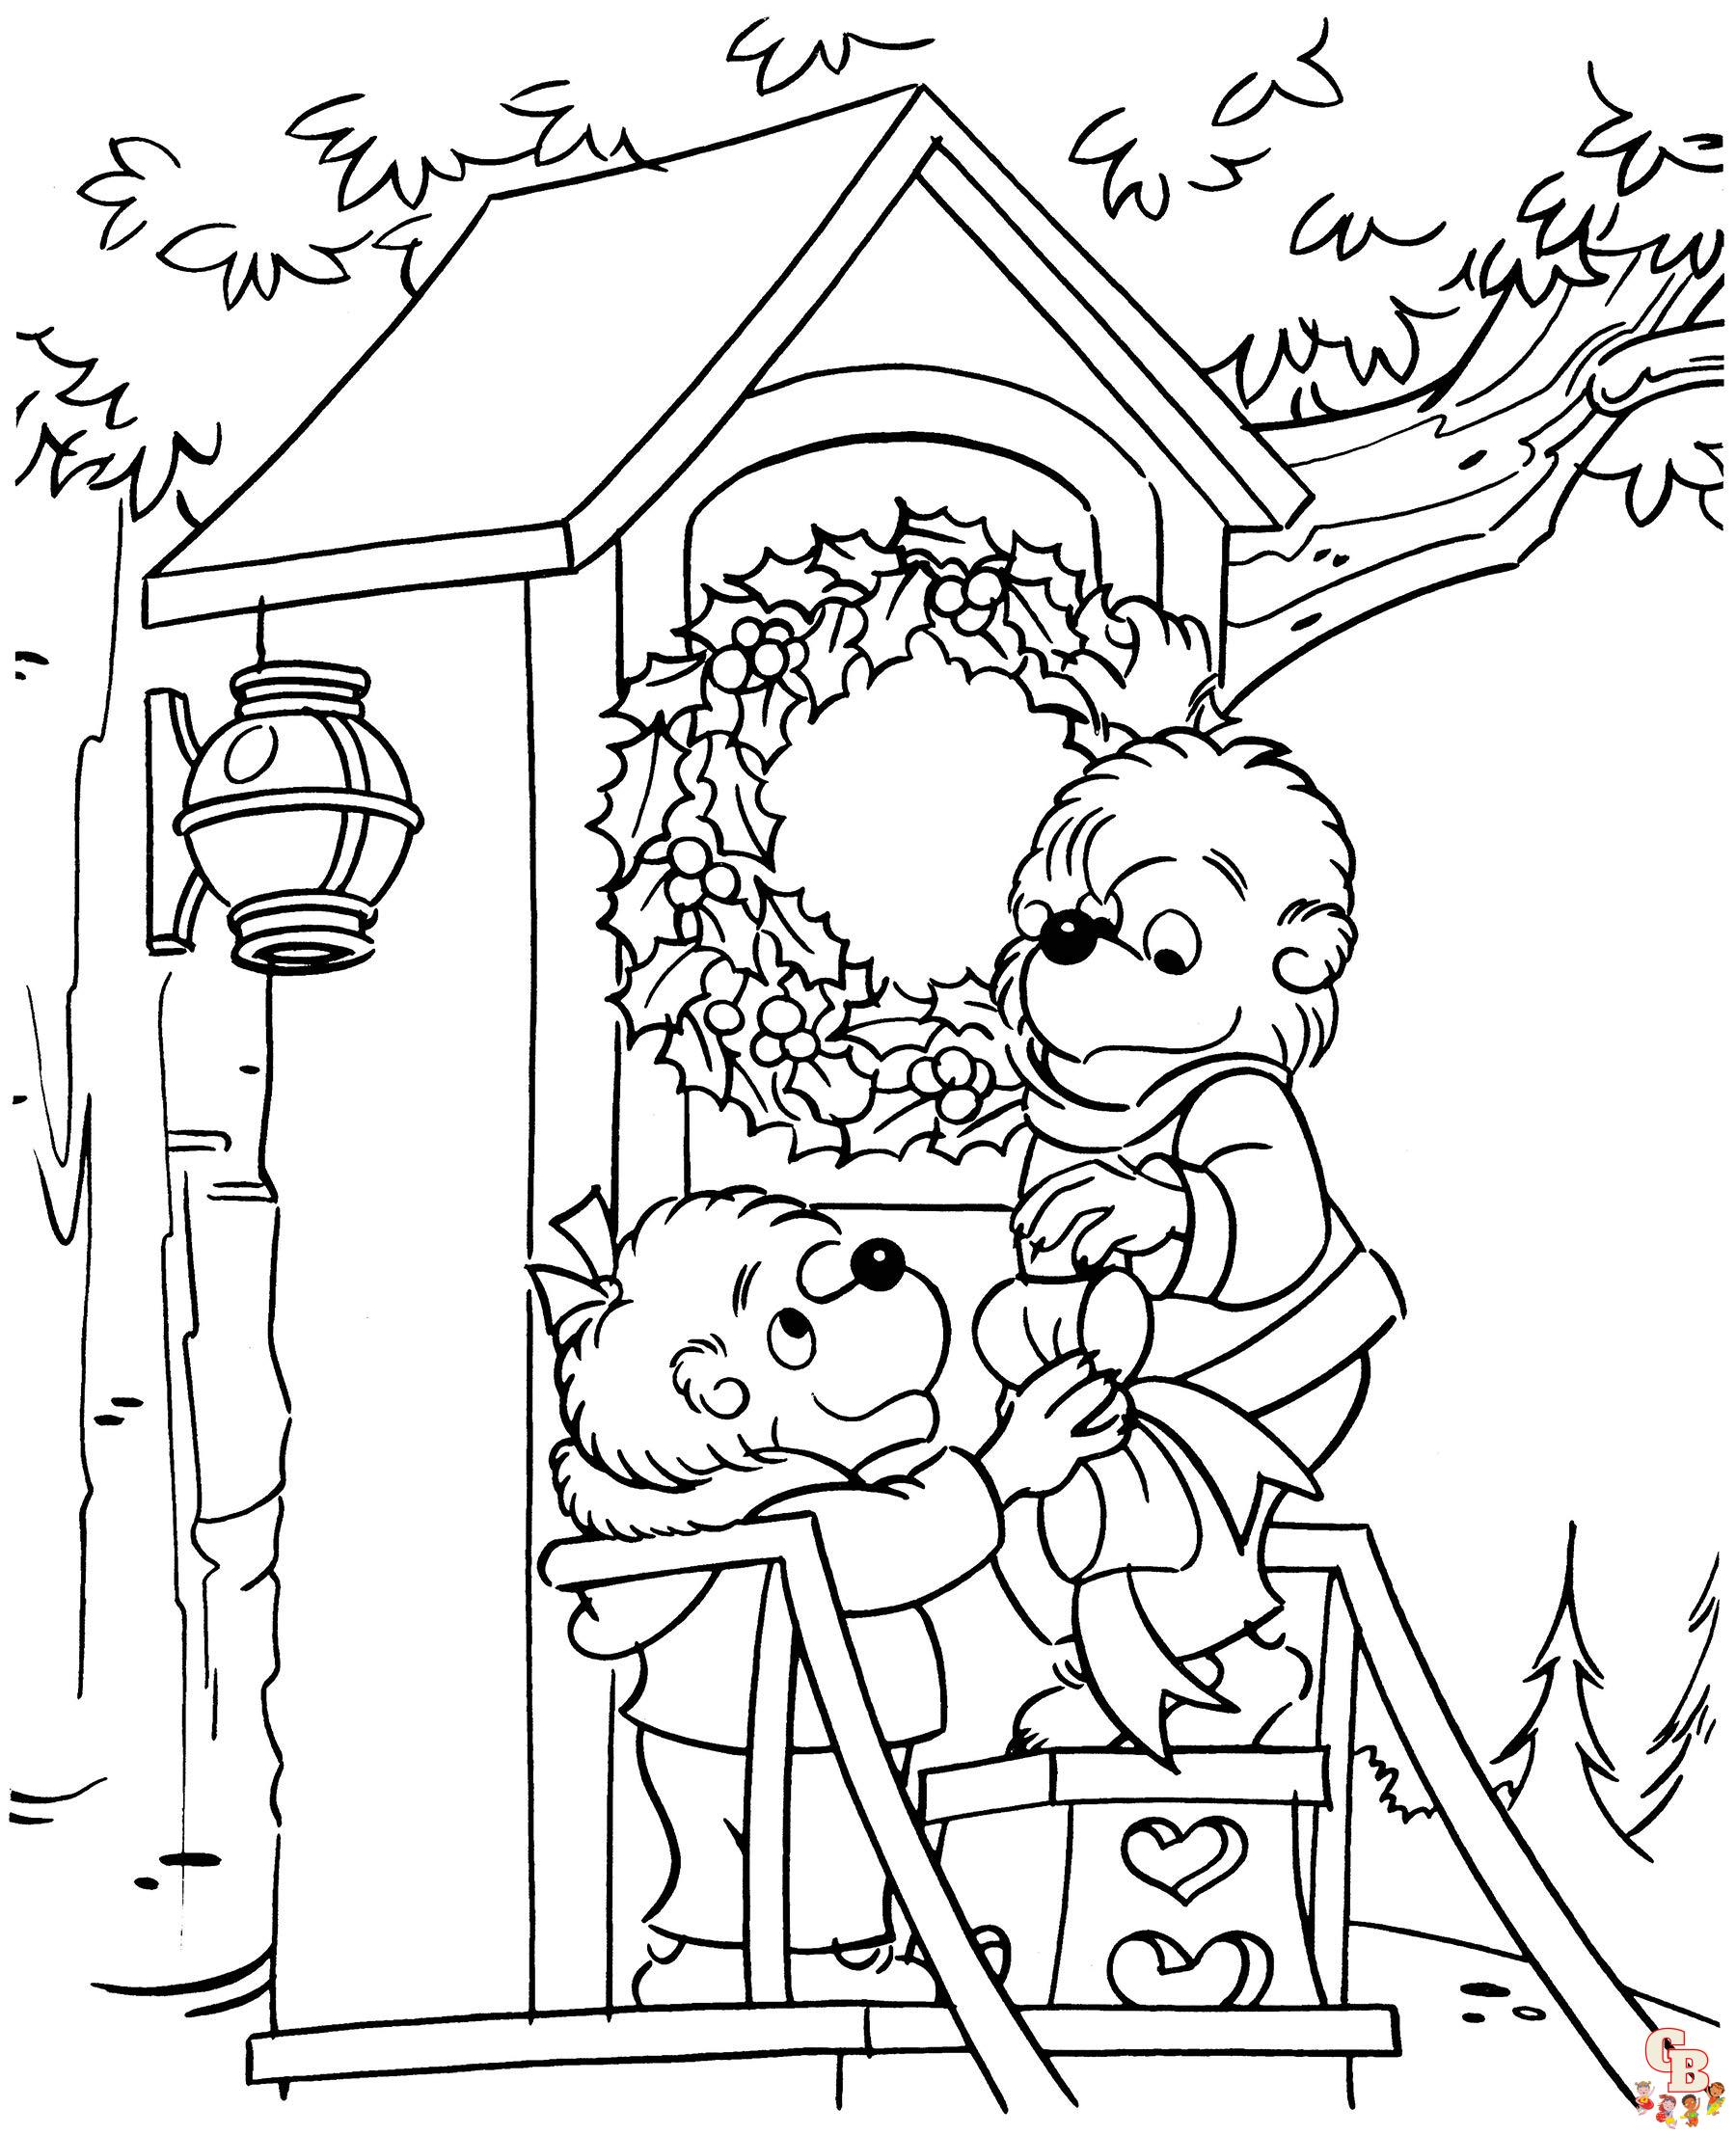 free coloring pages berenstain bears youtube